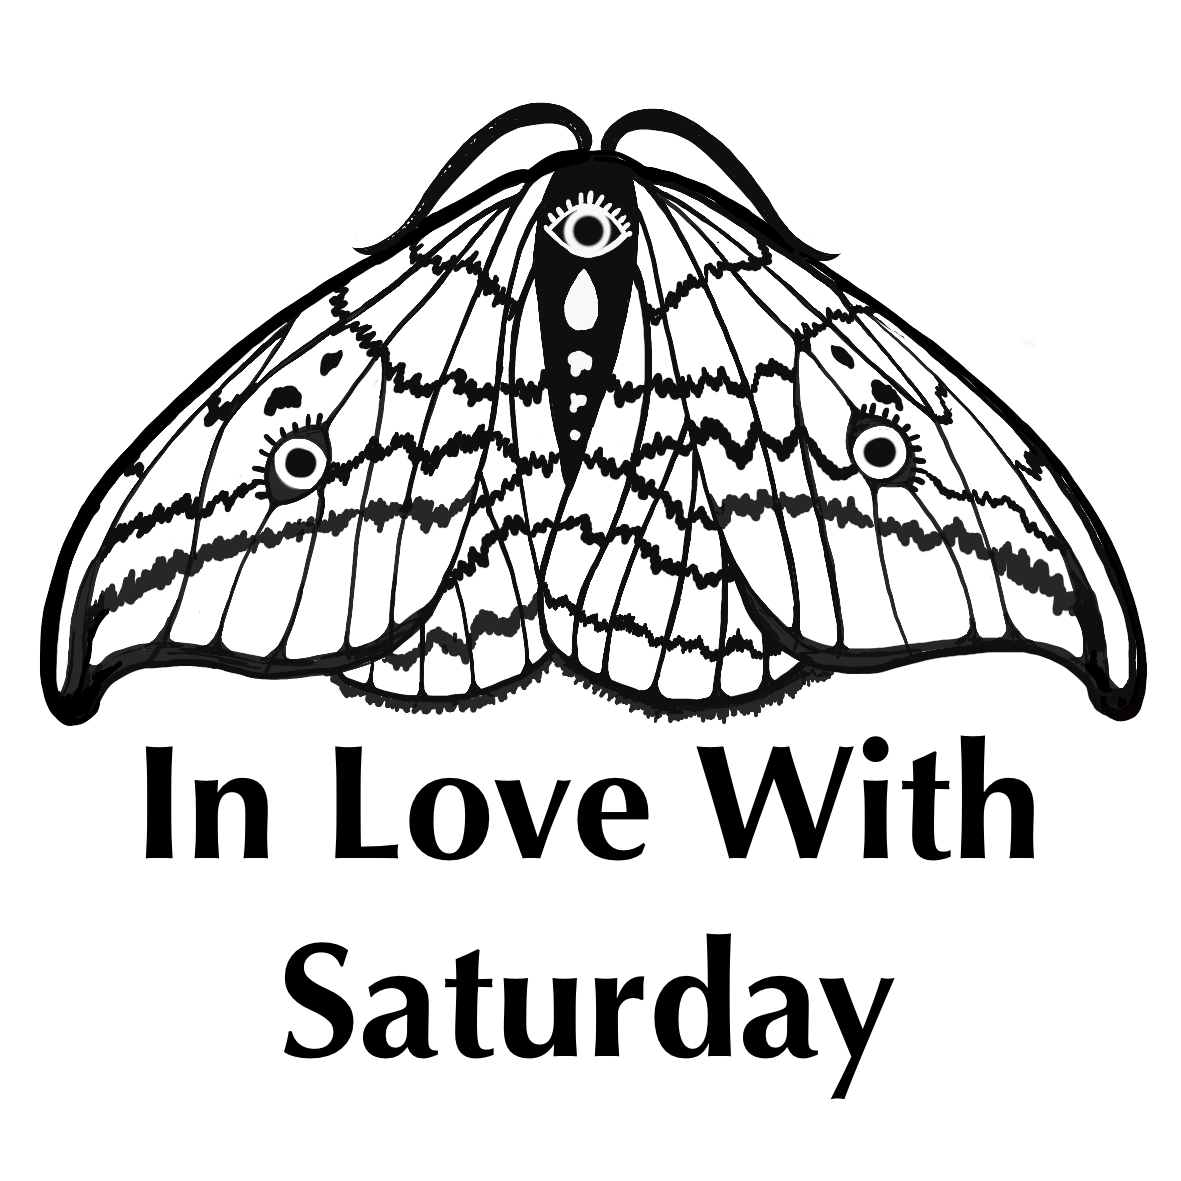 In Love With Saturday